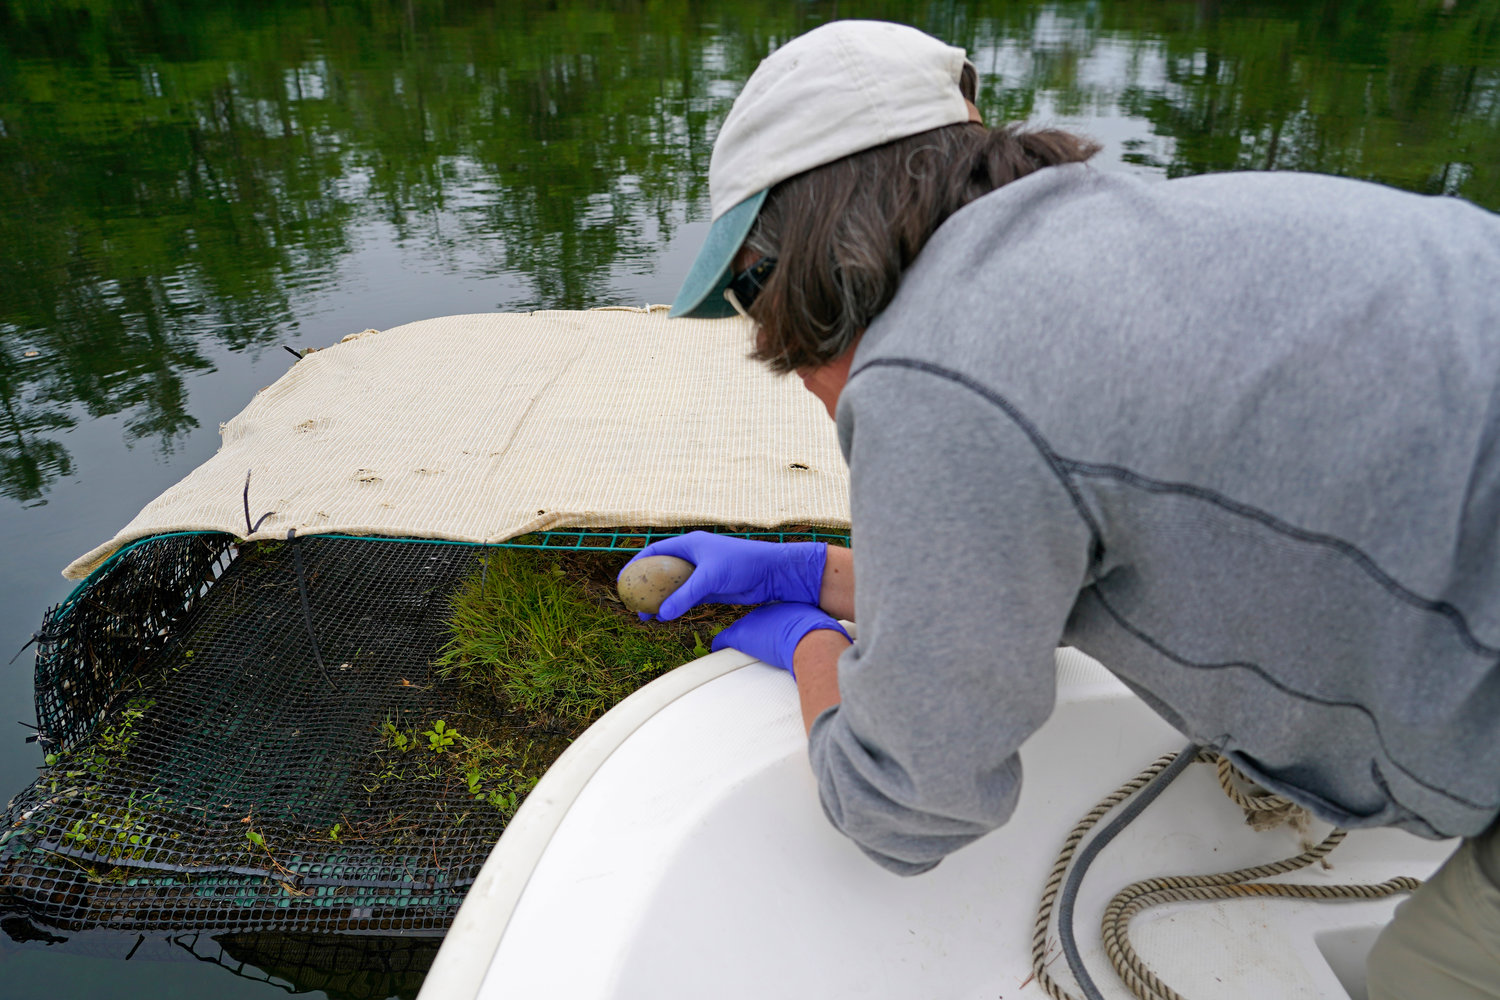 Biologist Tiffany Grade collects a non-viable loon egg from a floating nest on Squam Lake, Friday, June 25, 2021, in Holderness, N.H. Grade is studying the impact PCBs are having on loons and will examine the egg for possible PCB contamination. Researchers in New Hampshire have long struggled to understand why loon numbers have stagnated on the lake, despite a robust effort to protect them. (AP Photo/Elise Amendola)